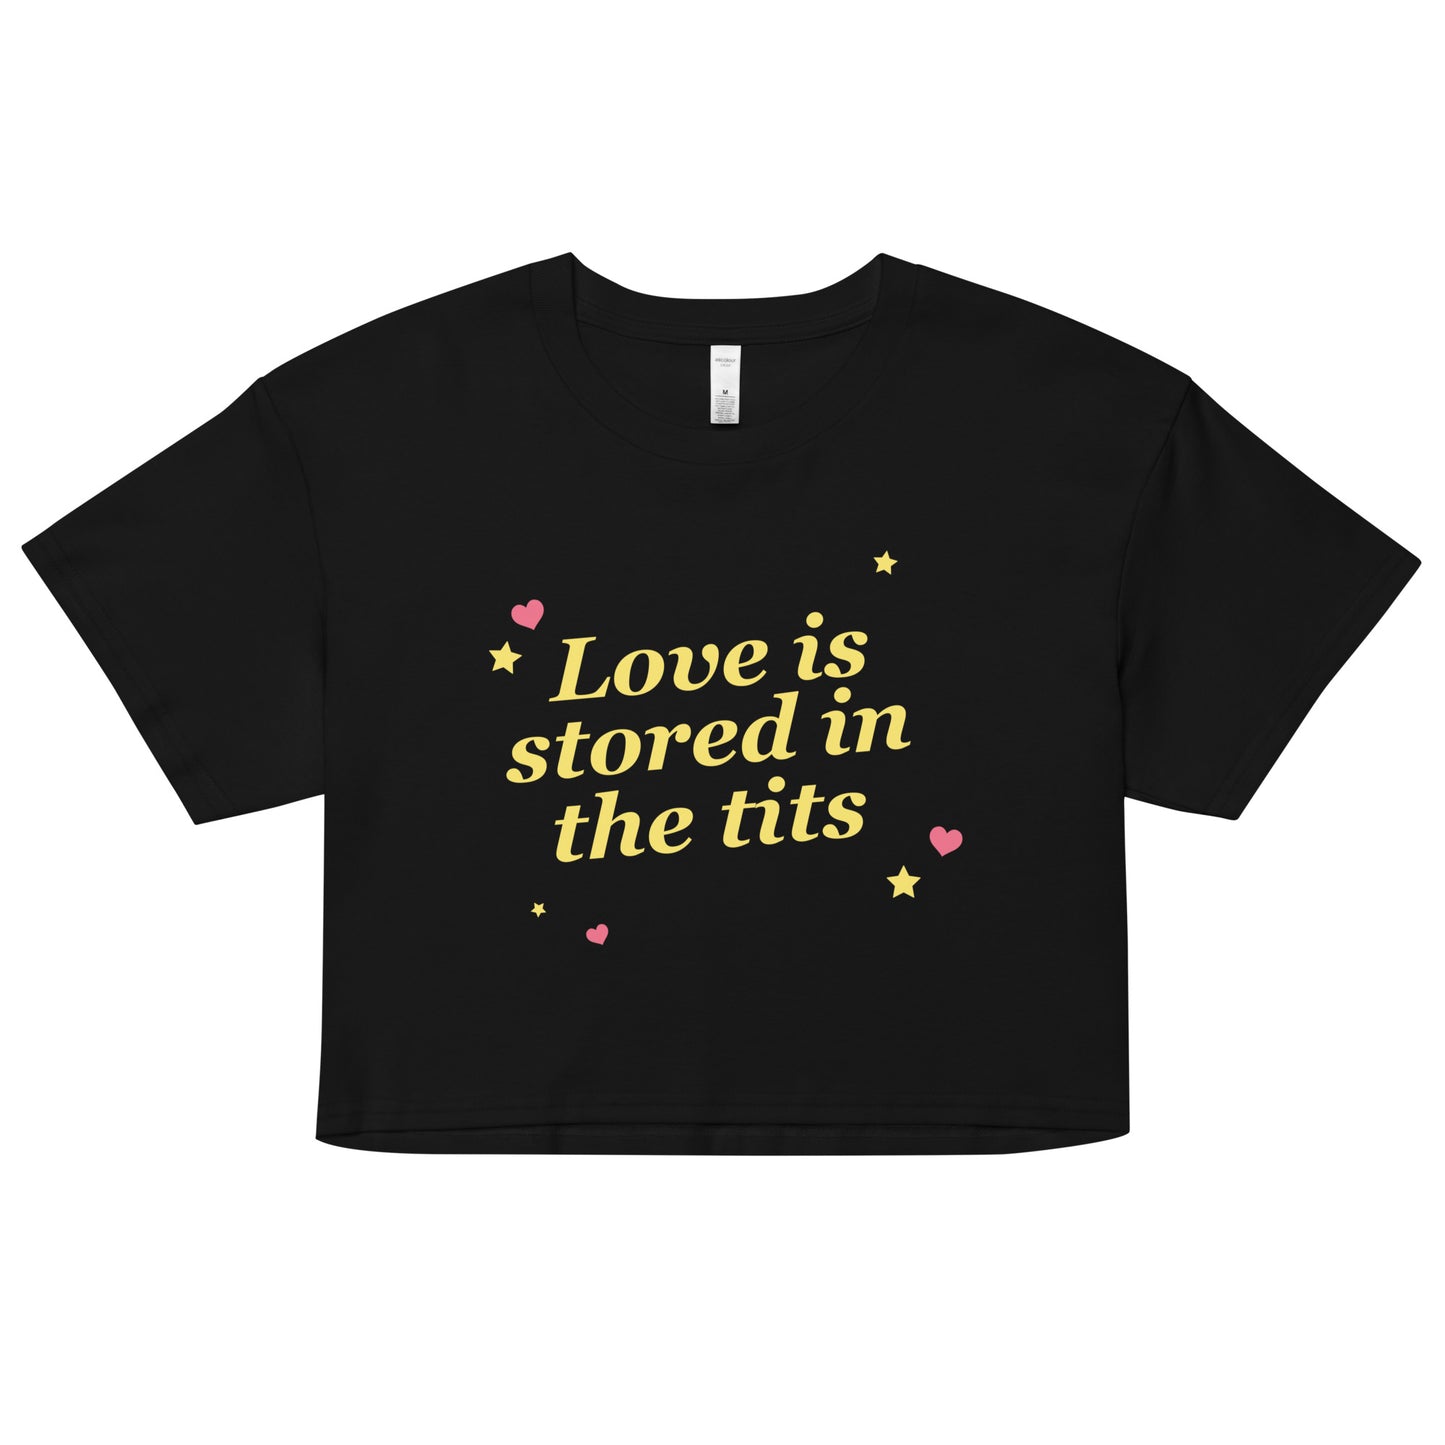 Love is Stored in the Tits crop top